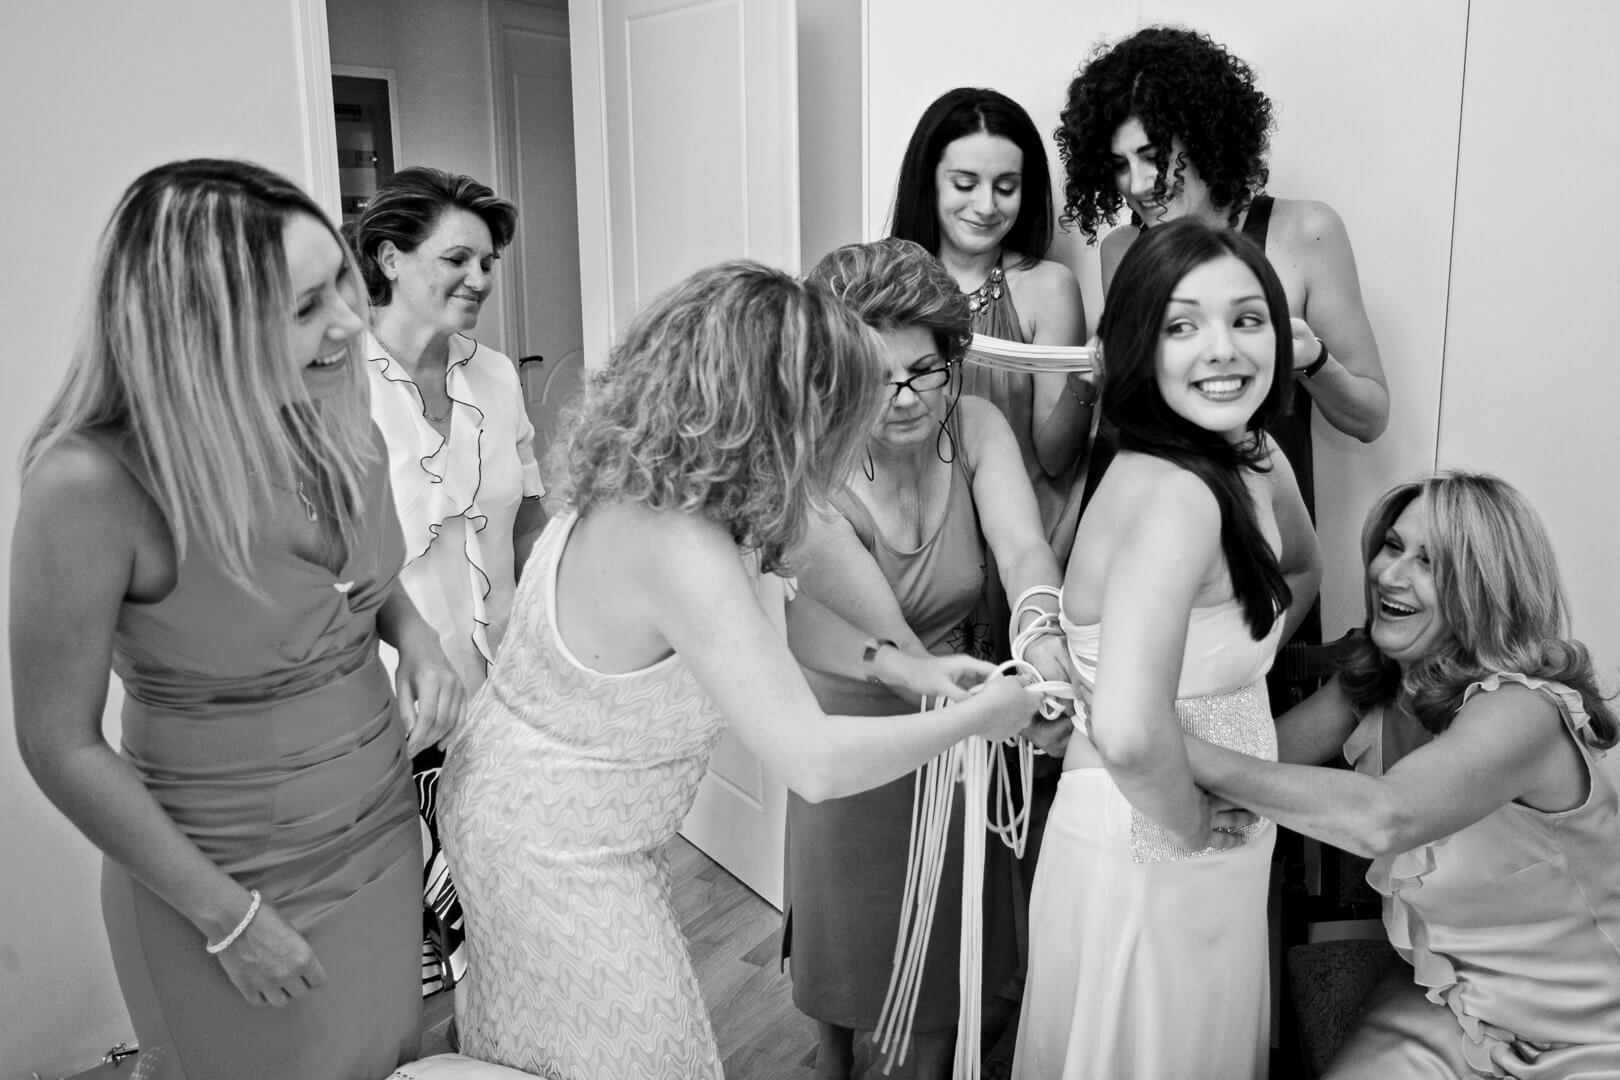 Bride joyfully assisted by friends and family, tying up her wedding dress with love and care.